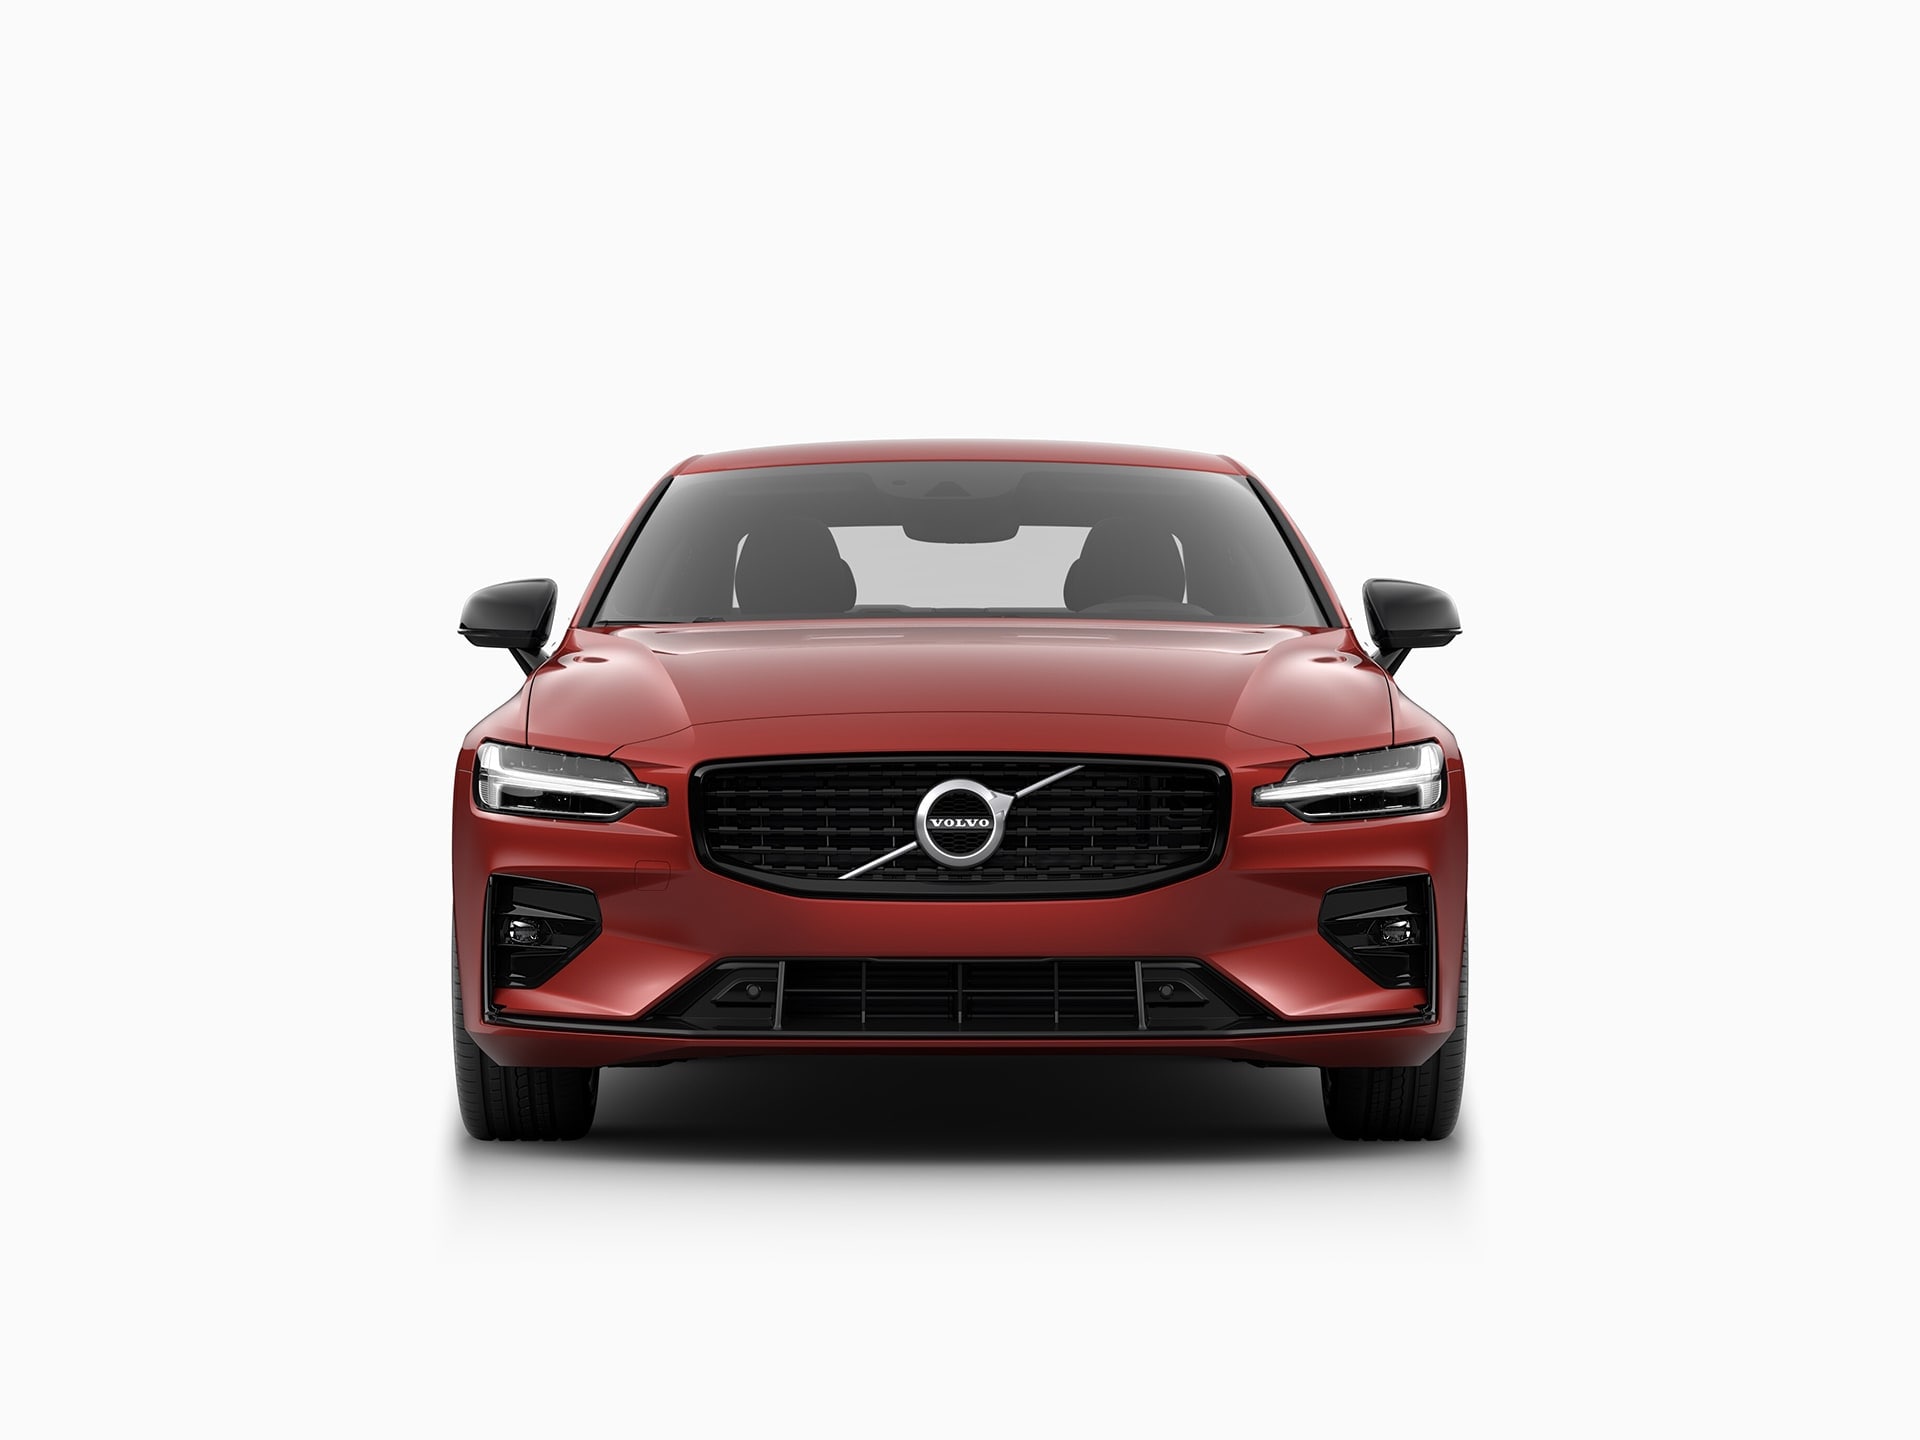 The front of a Volvo S60 sedan.